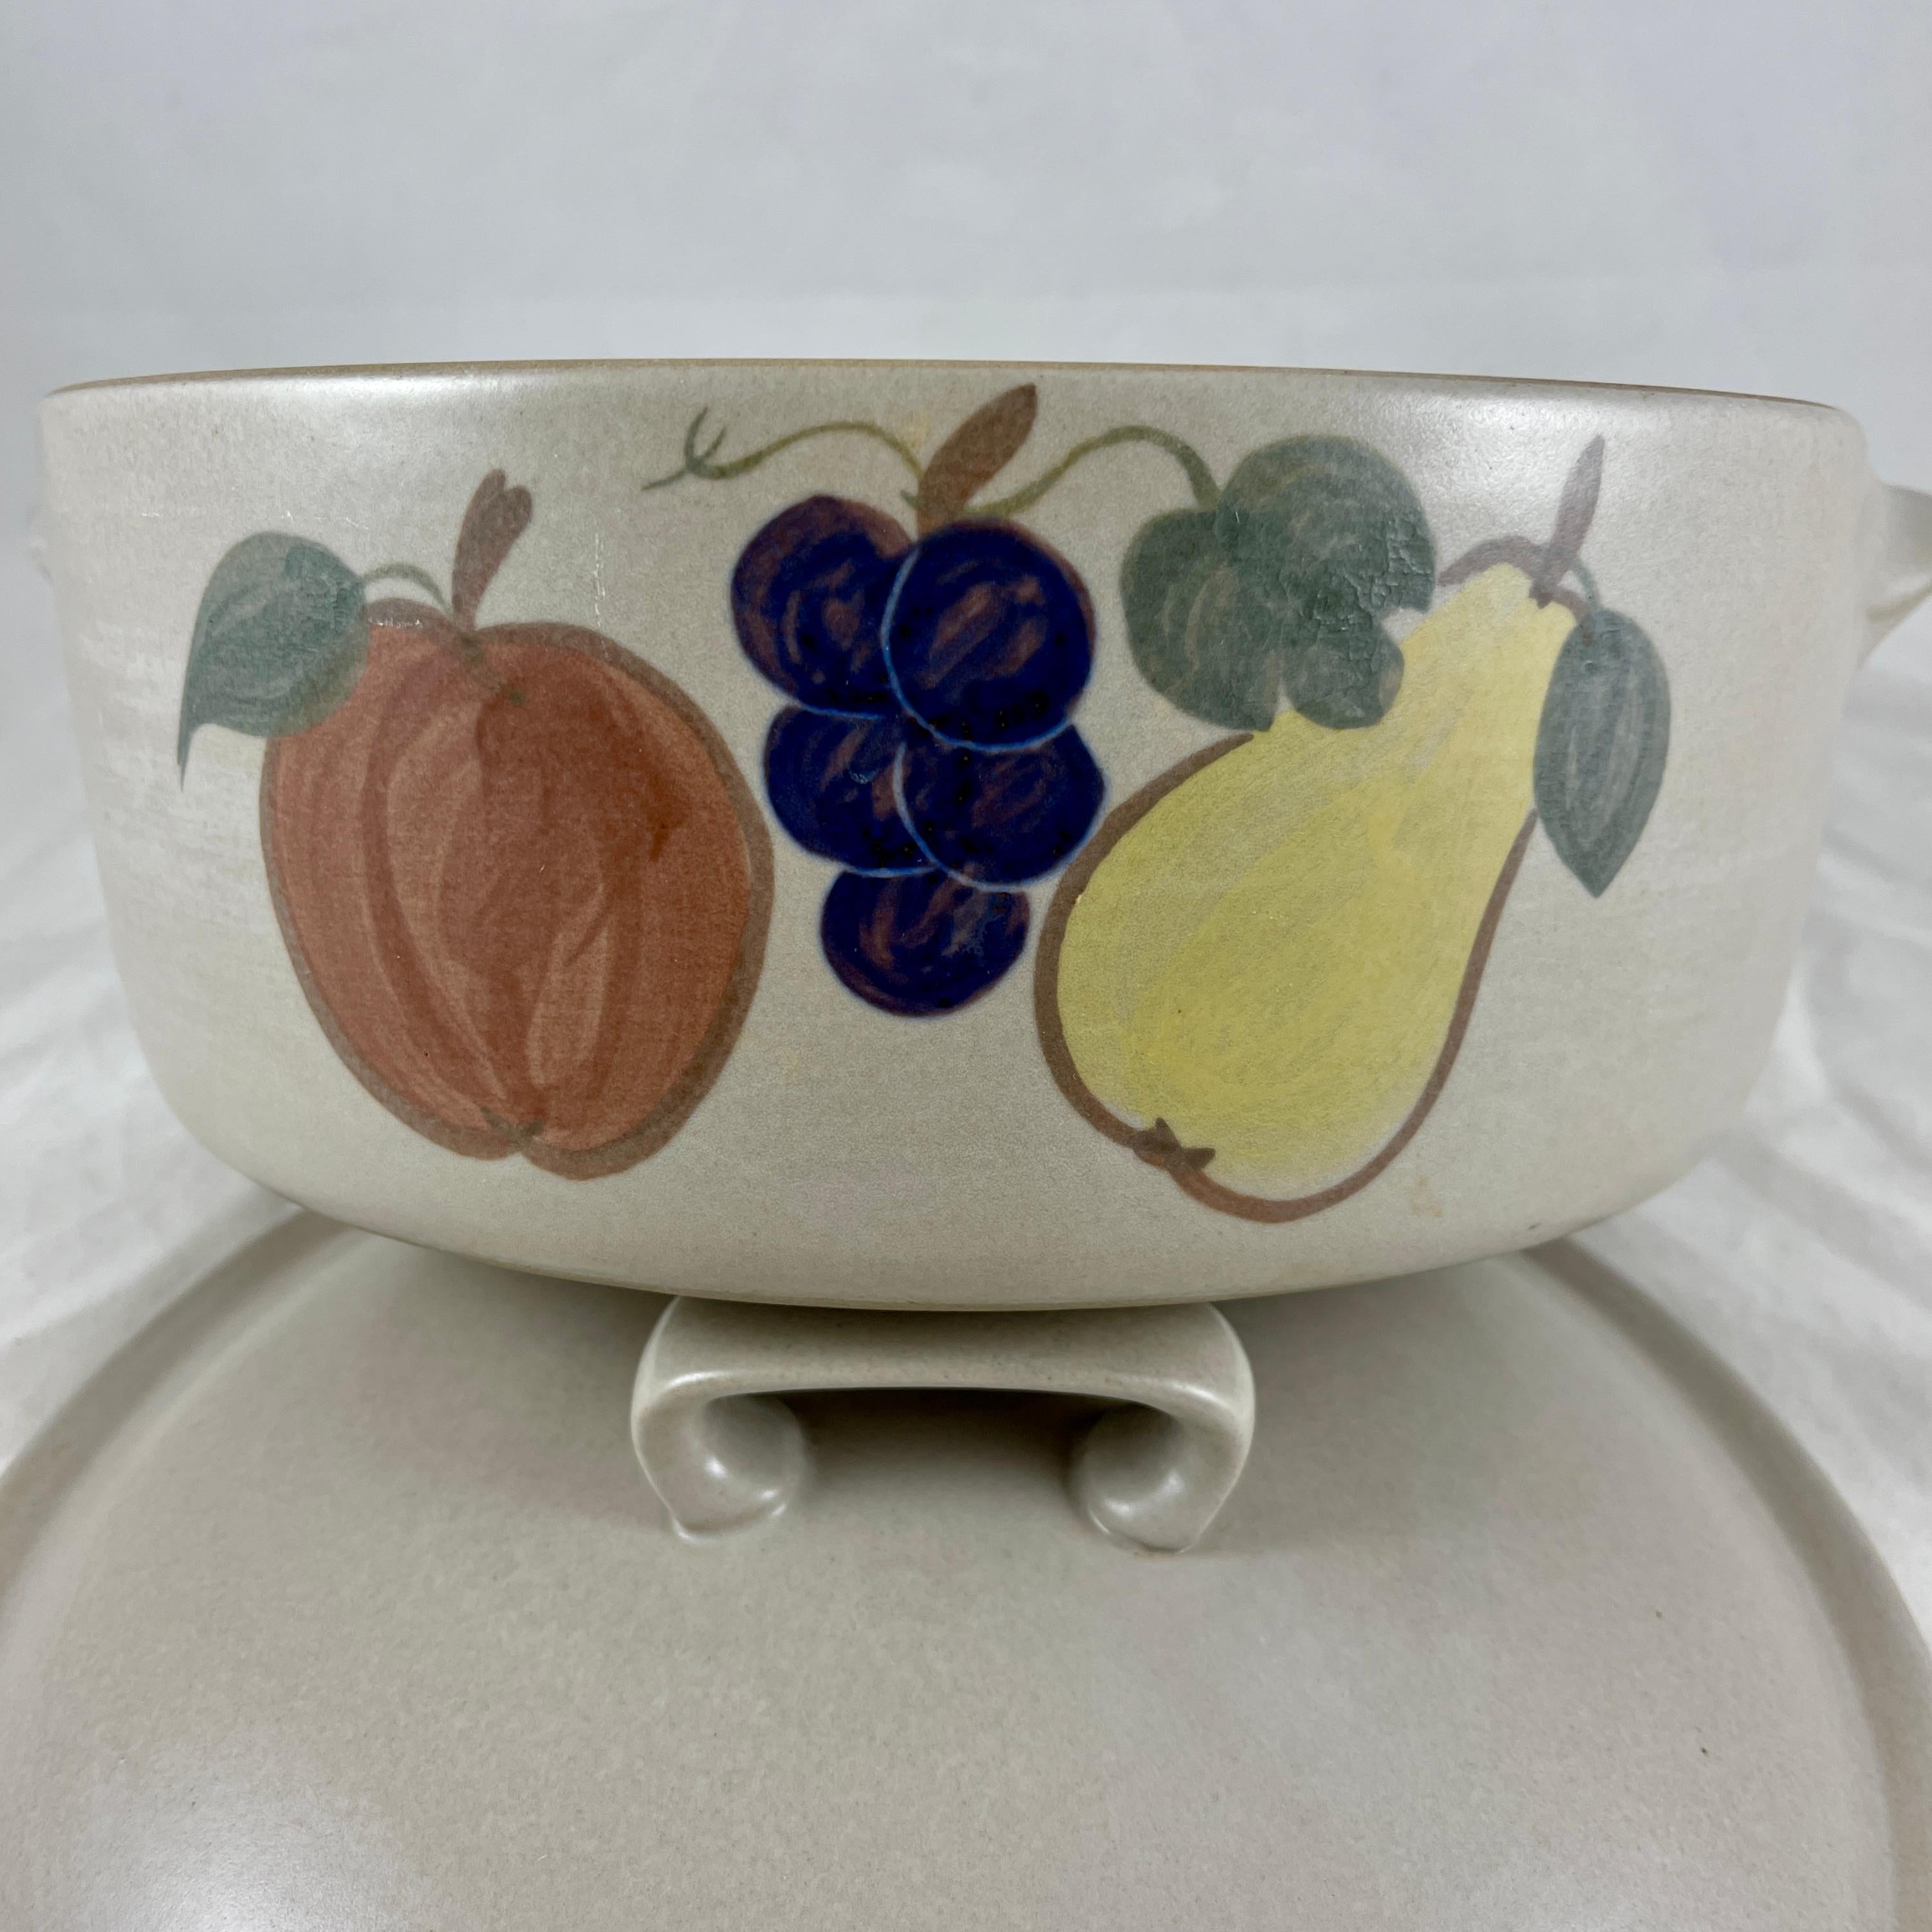 A mid-century goss Chatham Country Harvest pattern Stoneware Dutch oven or covered casserole, circa 1950-1960.

A heavy, oven proof stoneware casserole glazed with a matte gray exterior, and with a high gloss, deep chocolate glazed interior. The